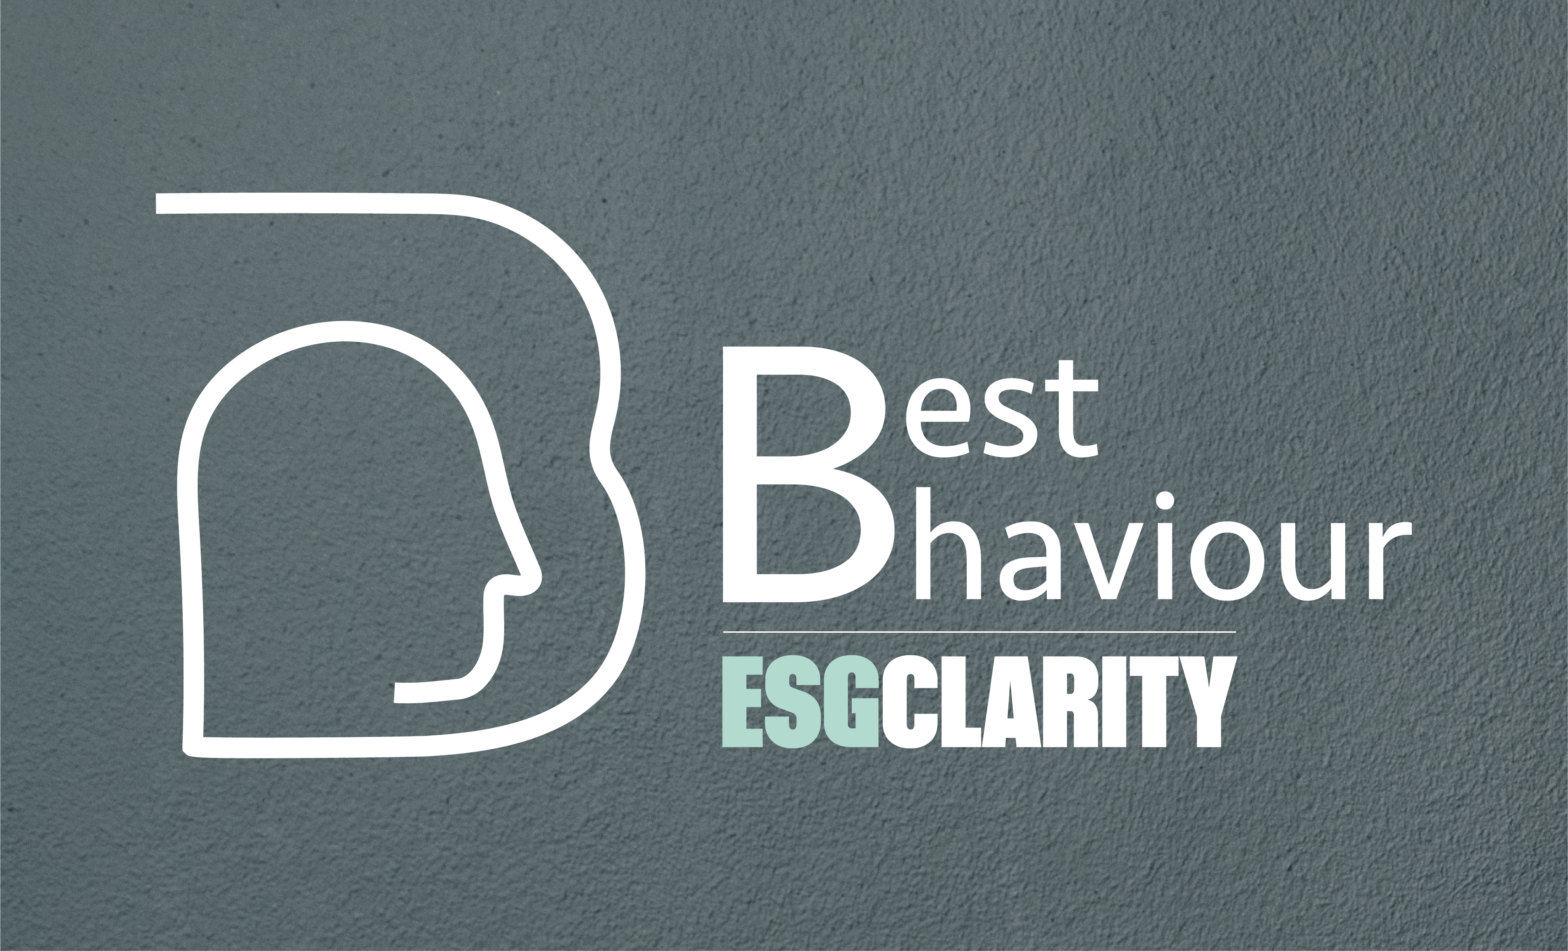 ESG Clarity teams up with B Corp coalition for Best B Haviour series